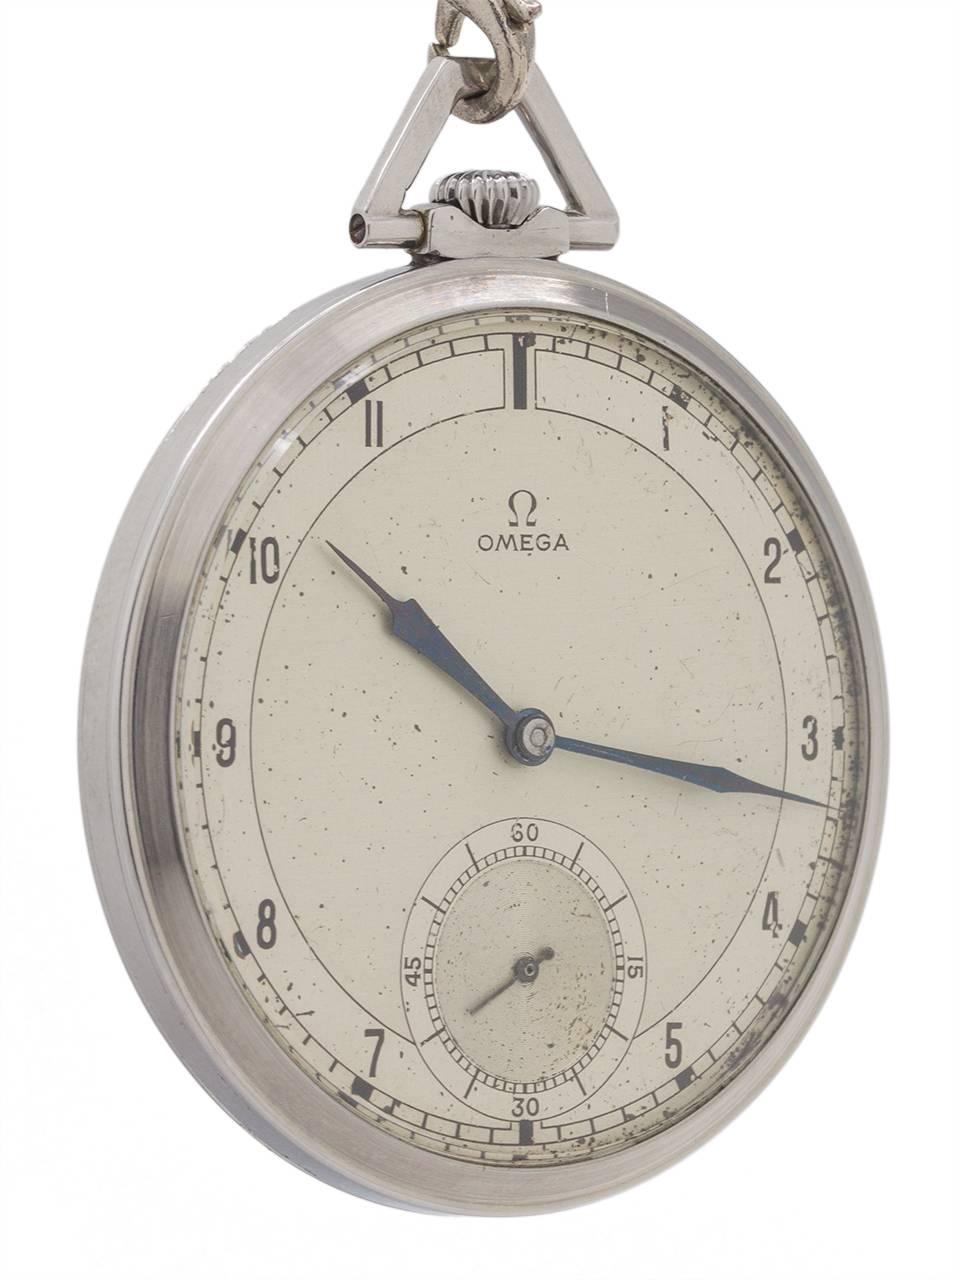 
Vitnage Omega Art Deco era man’s pocket watch circa 1935. Featuring a 45mm diameter 12 size (12-S)  open face industrial design stainless steel case with trapezoidal shaped bow, and a great looking original 2 tone silvered satin dial with printed